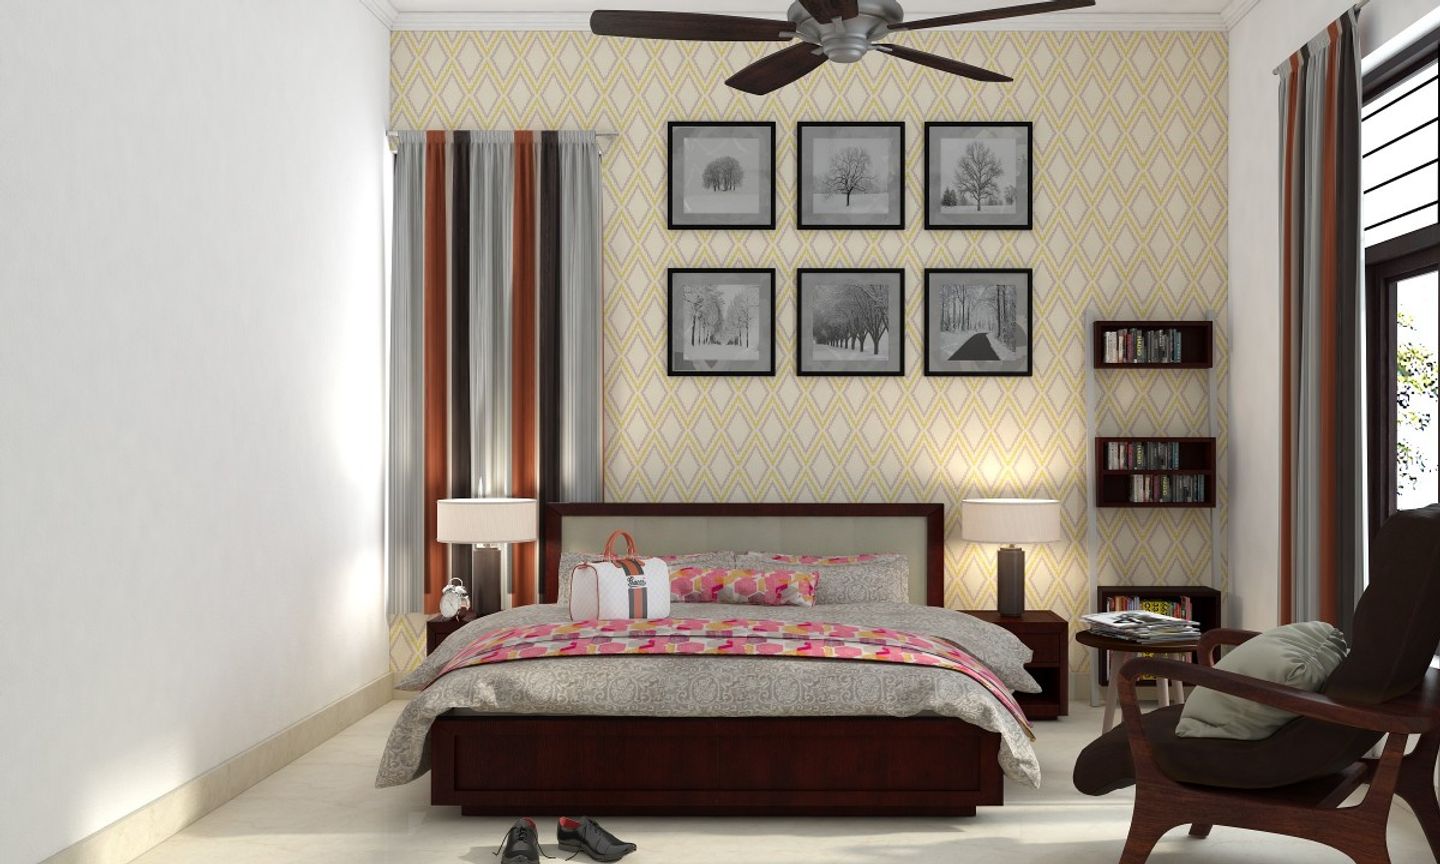 Modern Guest Bedroom Design With Wall Paintings And Wallpaper